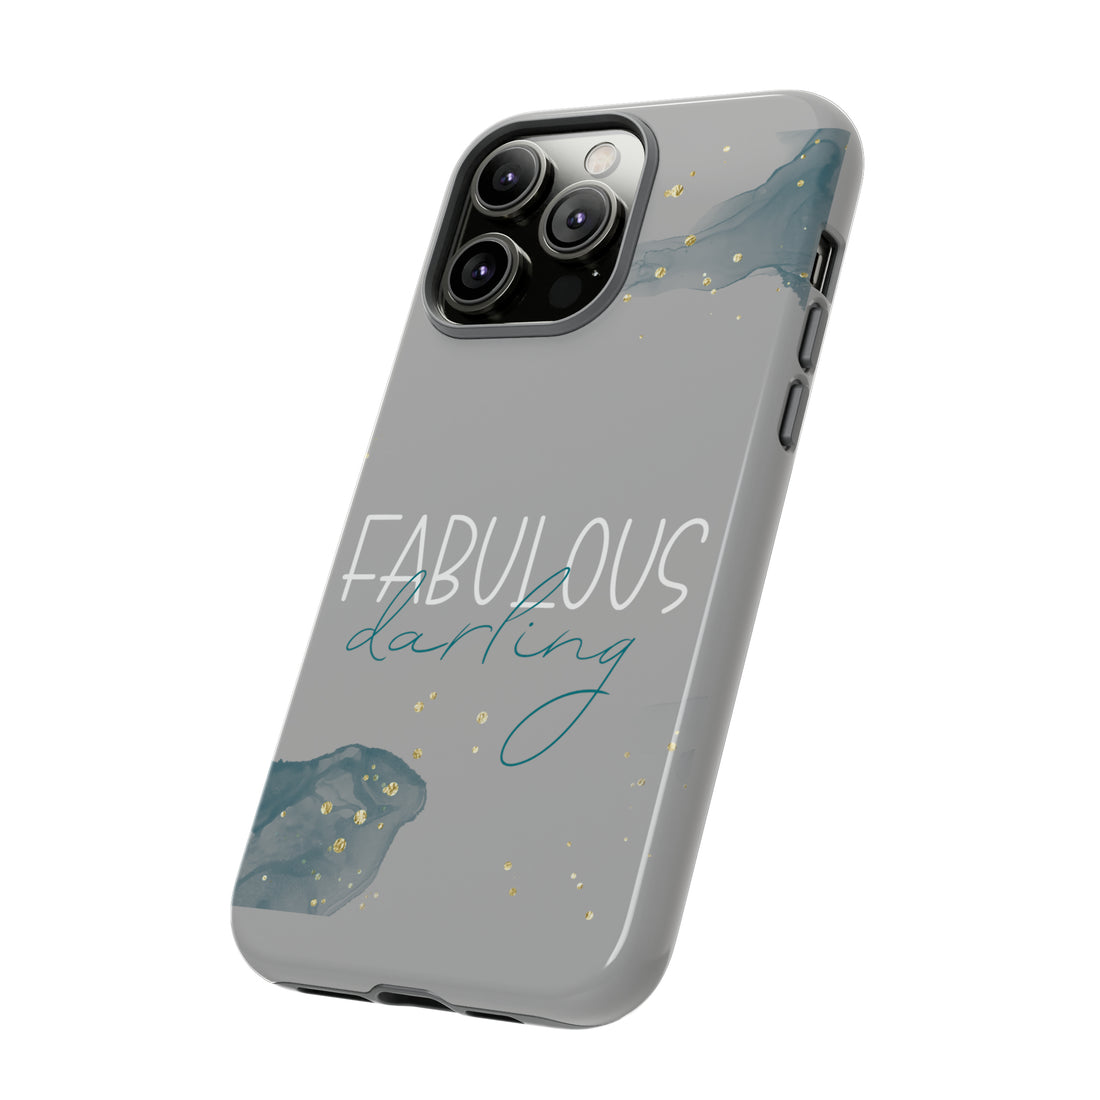 Fab Darling Tough Cases - Phone Case - Positively Sassy - Fab Darling Tough Cases